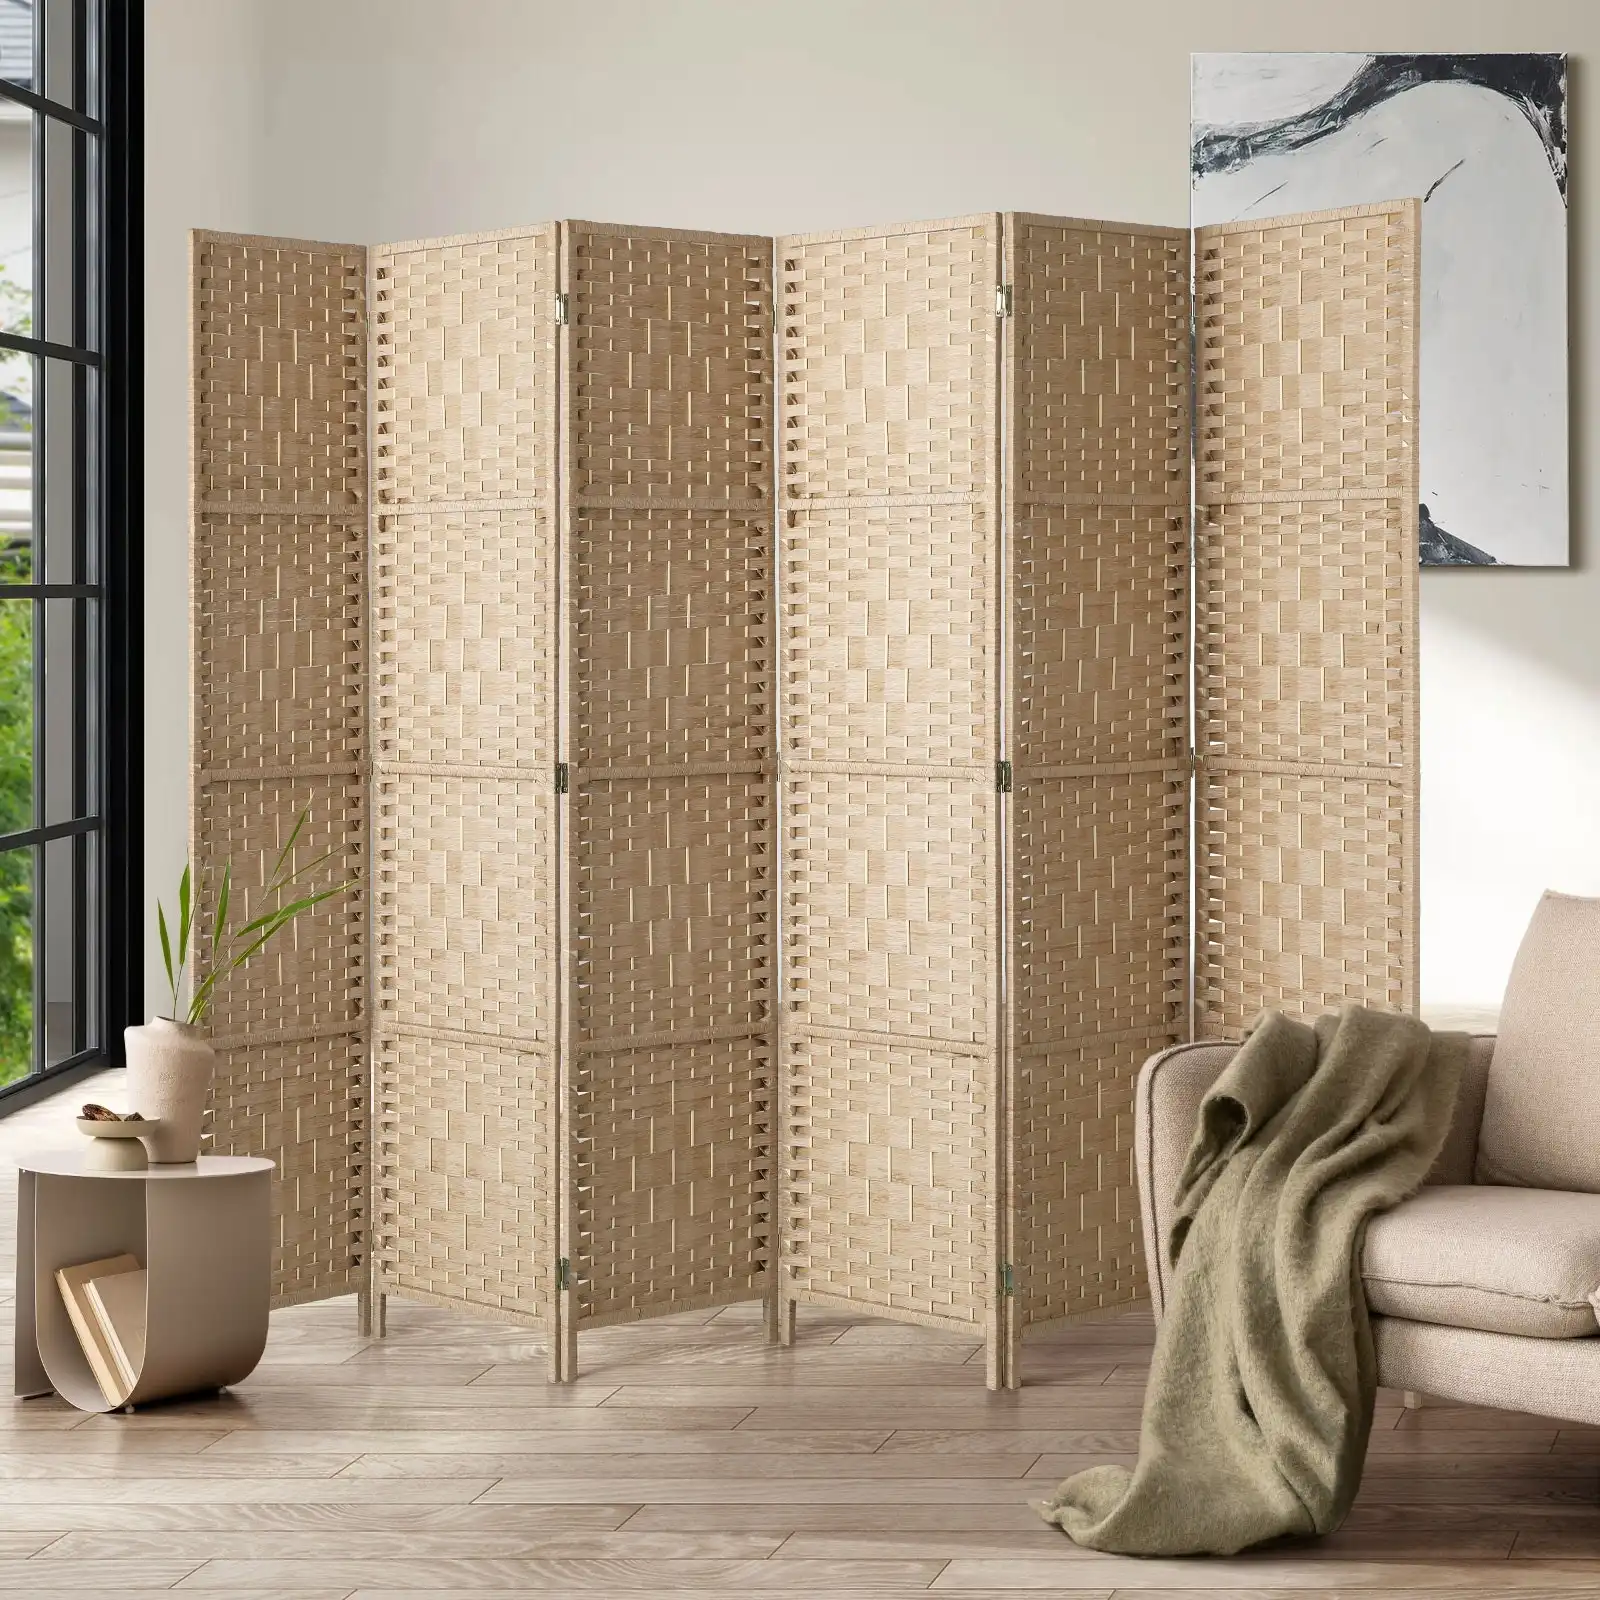 Oikiture 6 Panel Room Divider Privacy Screen Dividers Woven Wood Fold Stand